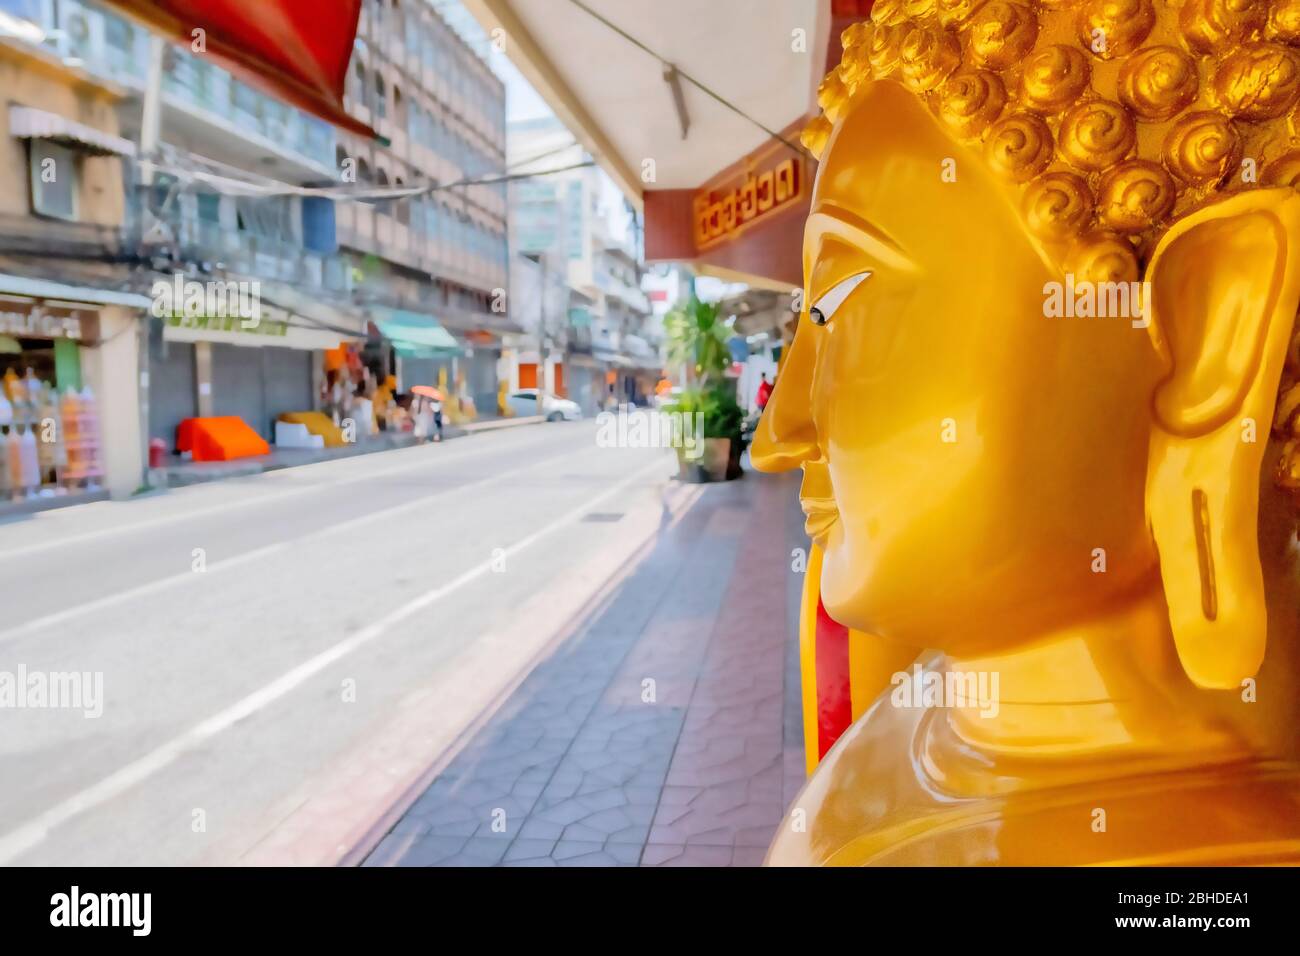 Image of buddha were placed on the pavement in downtown area of Bangkok waiting for sell to customer. Bangok, Thaialnd April 14, 2018 Stock Photo